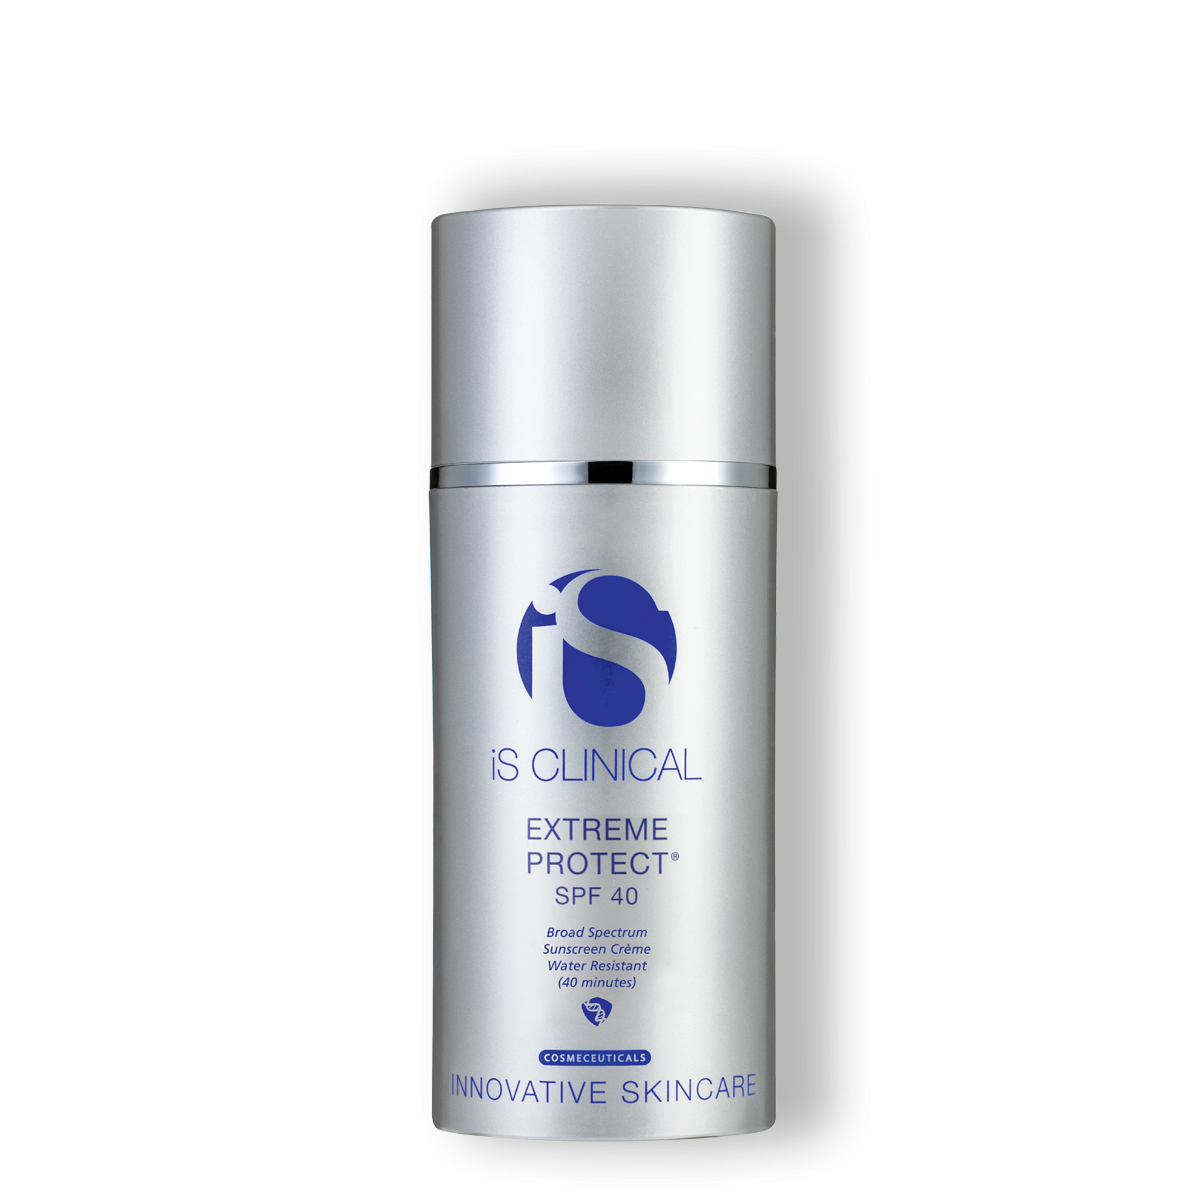 iS Clinical Extreme Protect SPF 40 - best known for being an RESTORATIVE, ALL-PHYSICAL SUNSCREEN with ULTIMATE PROTECTION.